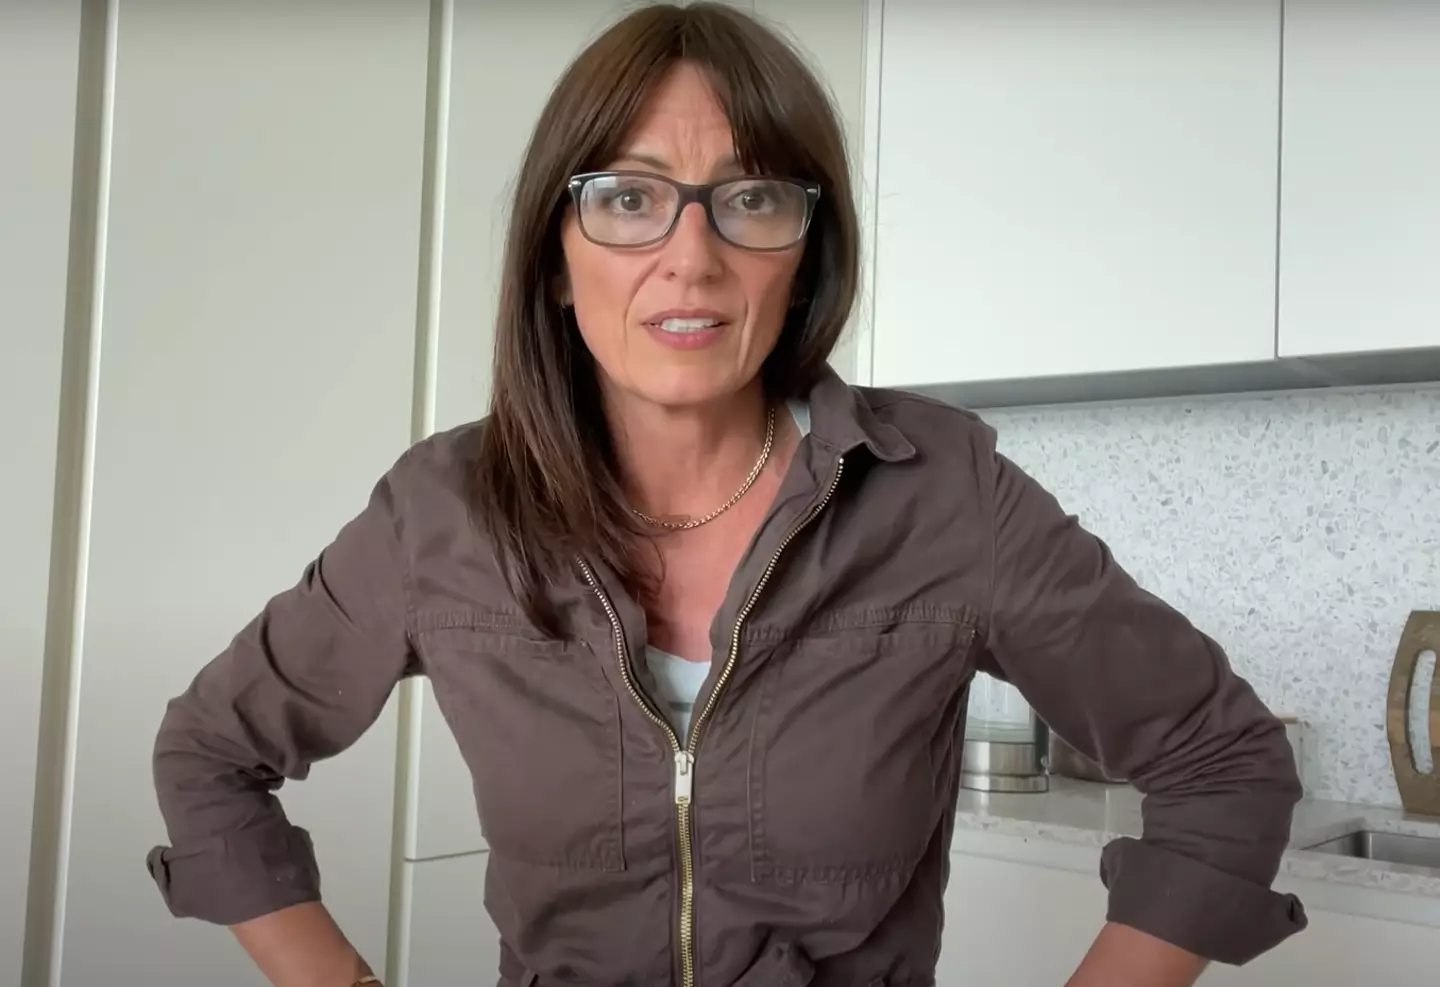 Davina McCall has been open about her own experiences.